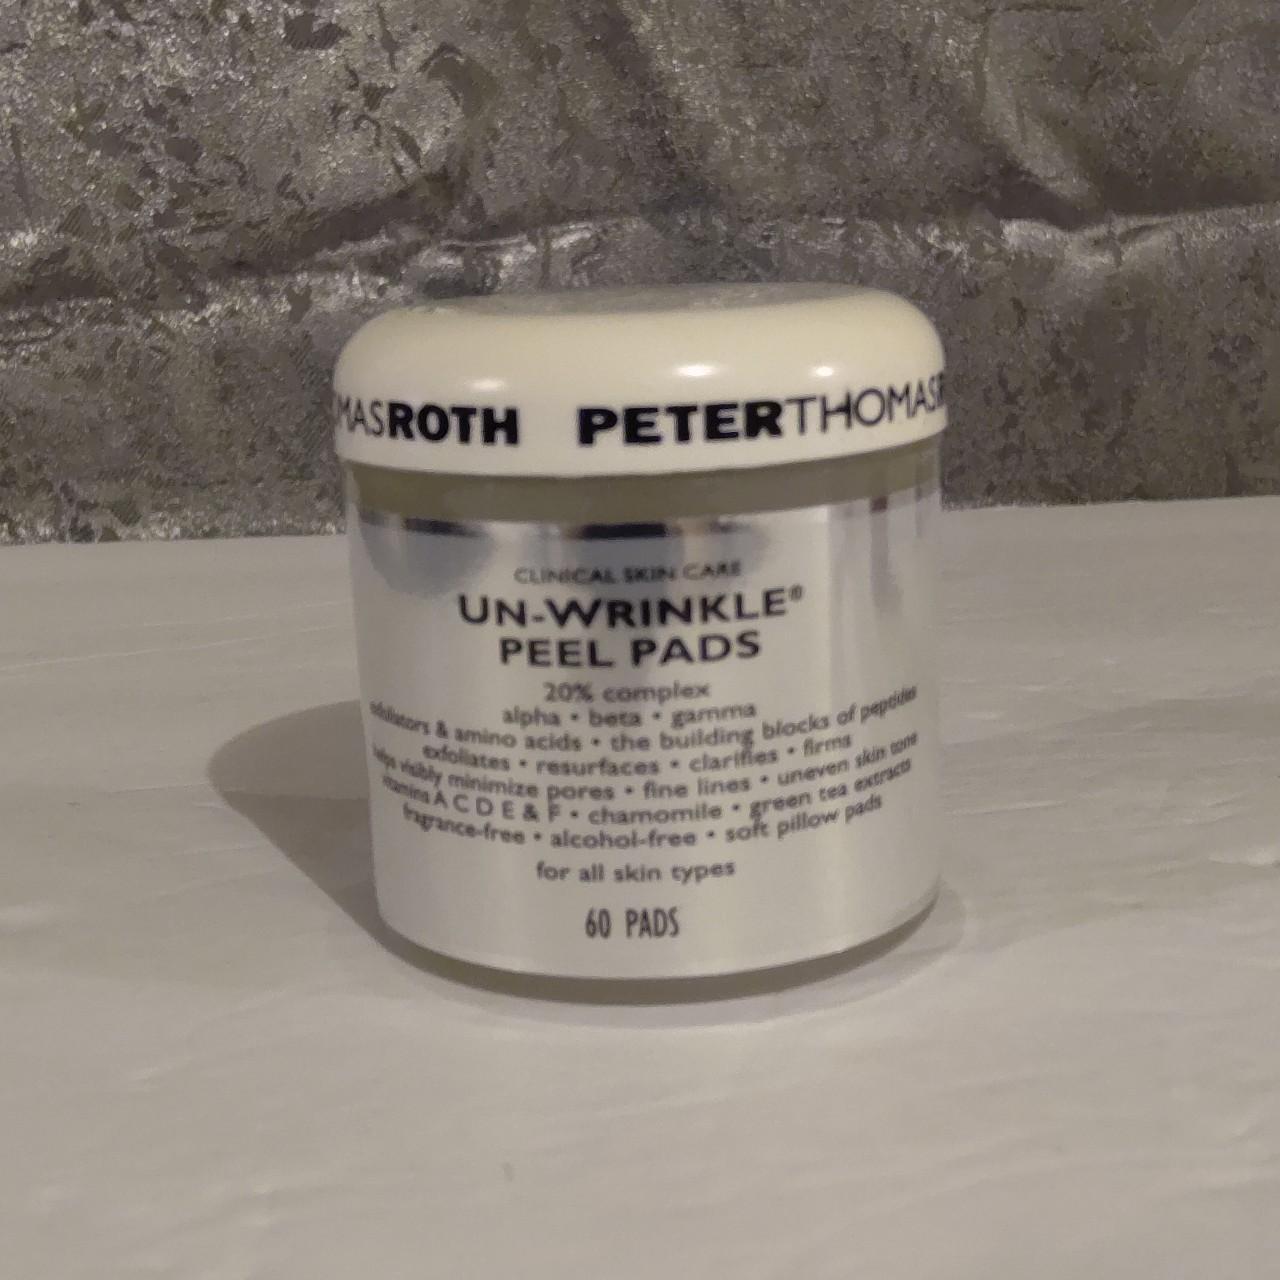 Product Image 1 - Brand new un-wrinkle pads by